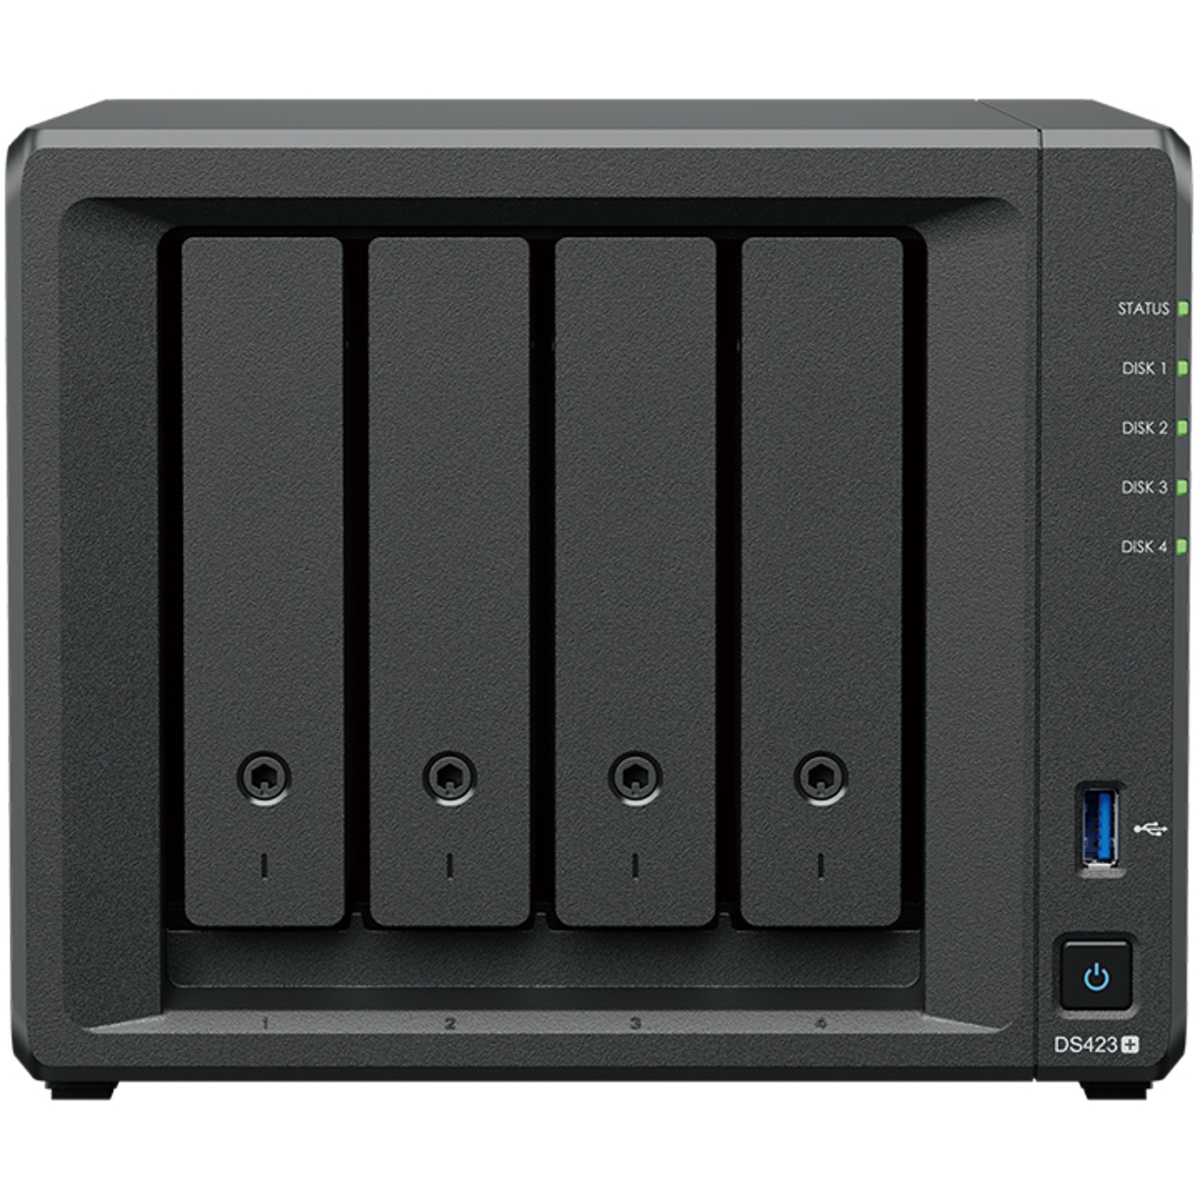 Synology DiskStation DS423+ 56tb 4-Bay Desktop Multimedia / Power User / Business NAS - Network Attached Storage Device 4x14tb Seagate IronWolf Pro ST14000NT001 3.5 7200rpm SATA 6Gb/s HDD NAS Class Drives Installed - Burn-In Tested - FREE RAM UPGRADE DiskStation DS423+